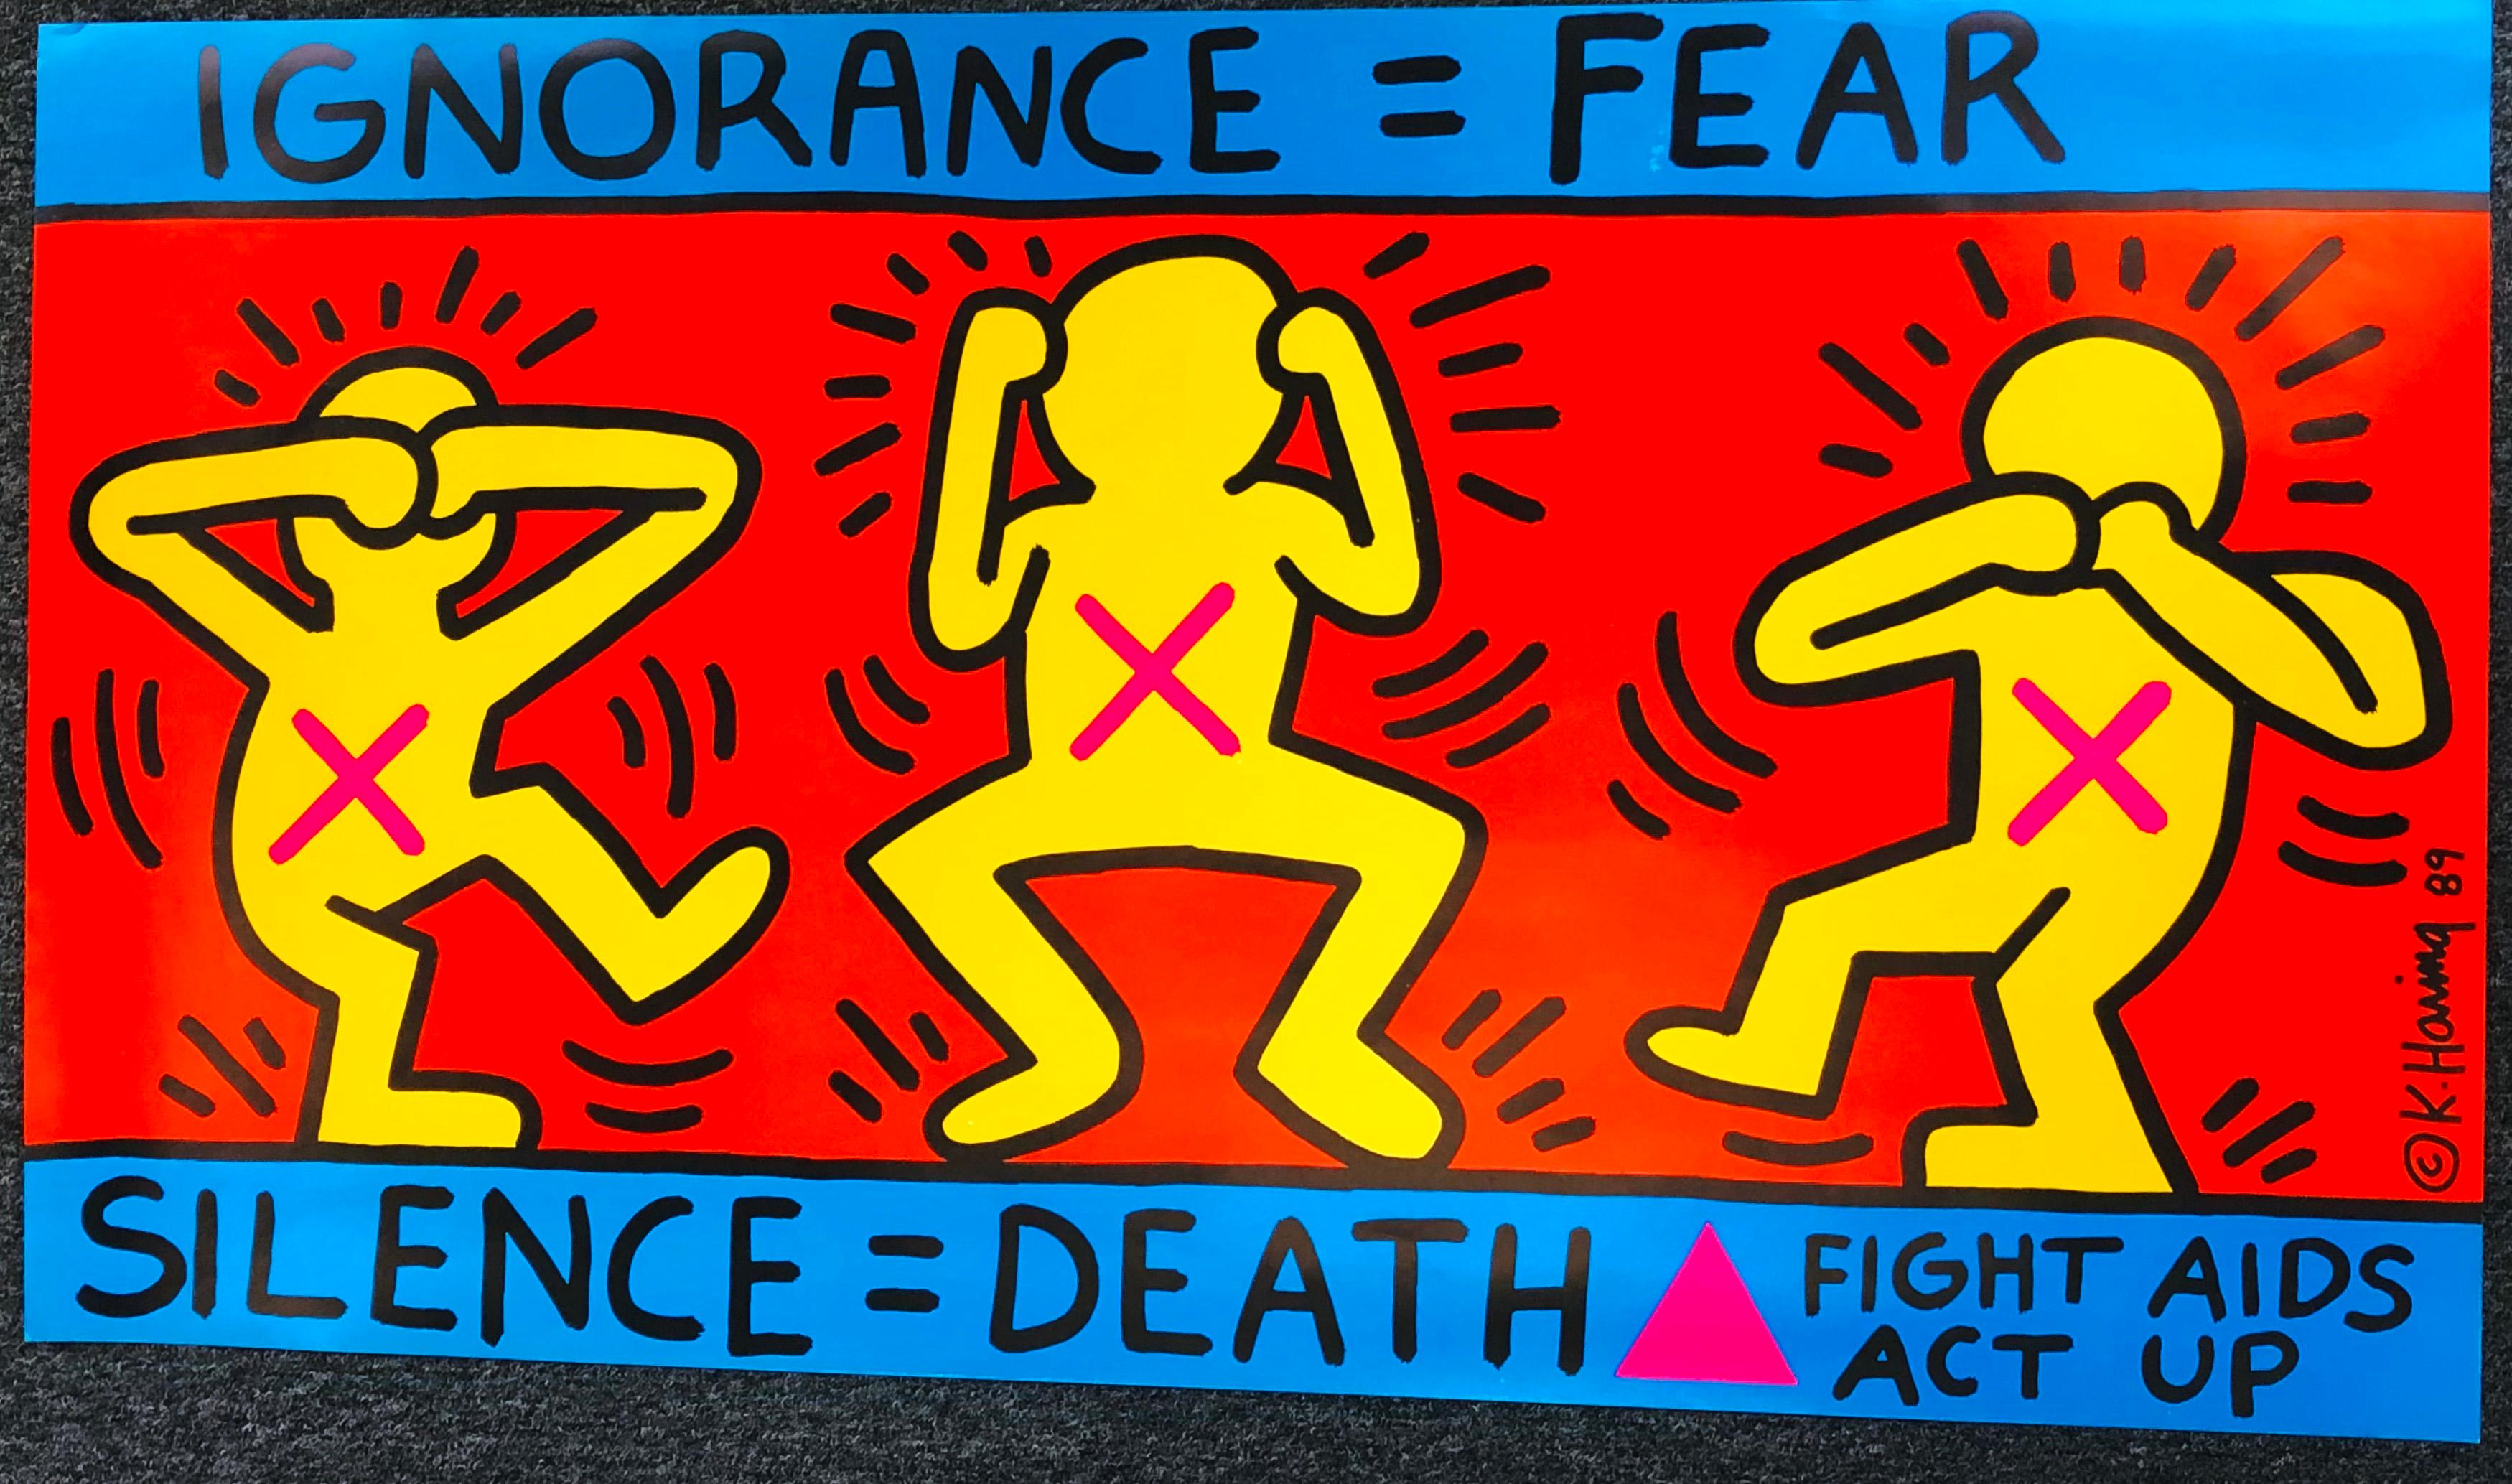 Original 1989 Keith Haring, Ignorance = Fear Silence = Death poster 
On behalf of the New York-based AIDS activist group AIDS Coalition to Unleash Power (ACT UP), Keith Haring designed and executed this poster in 1989 after the artist had been